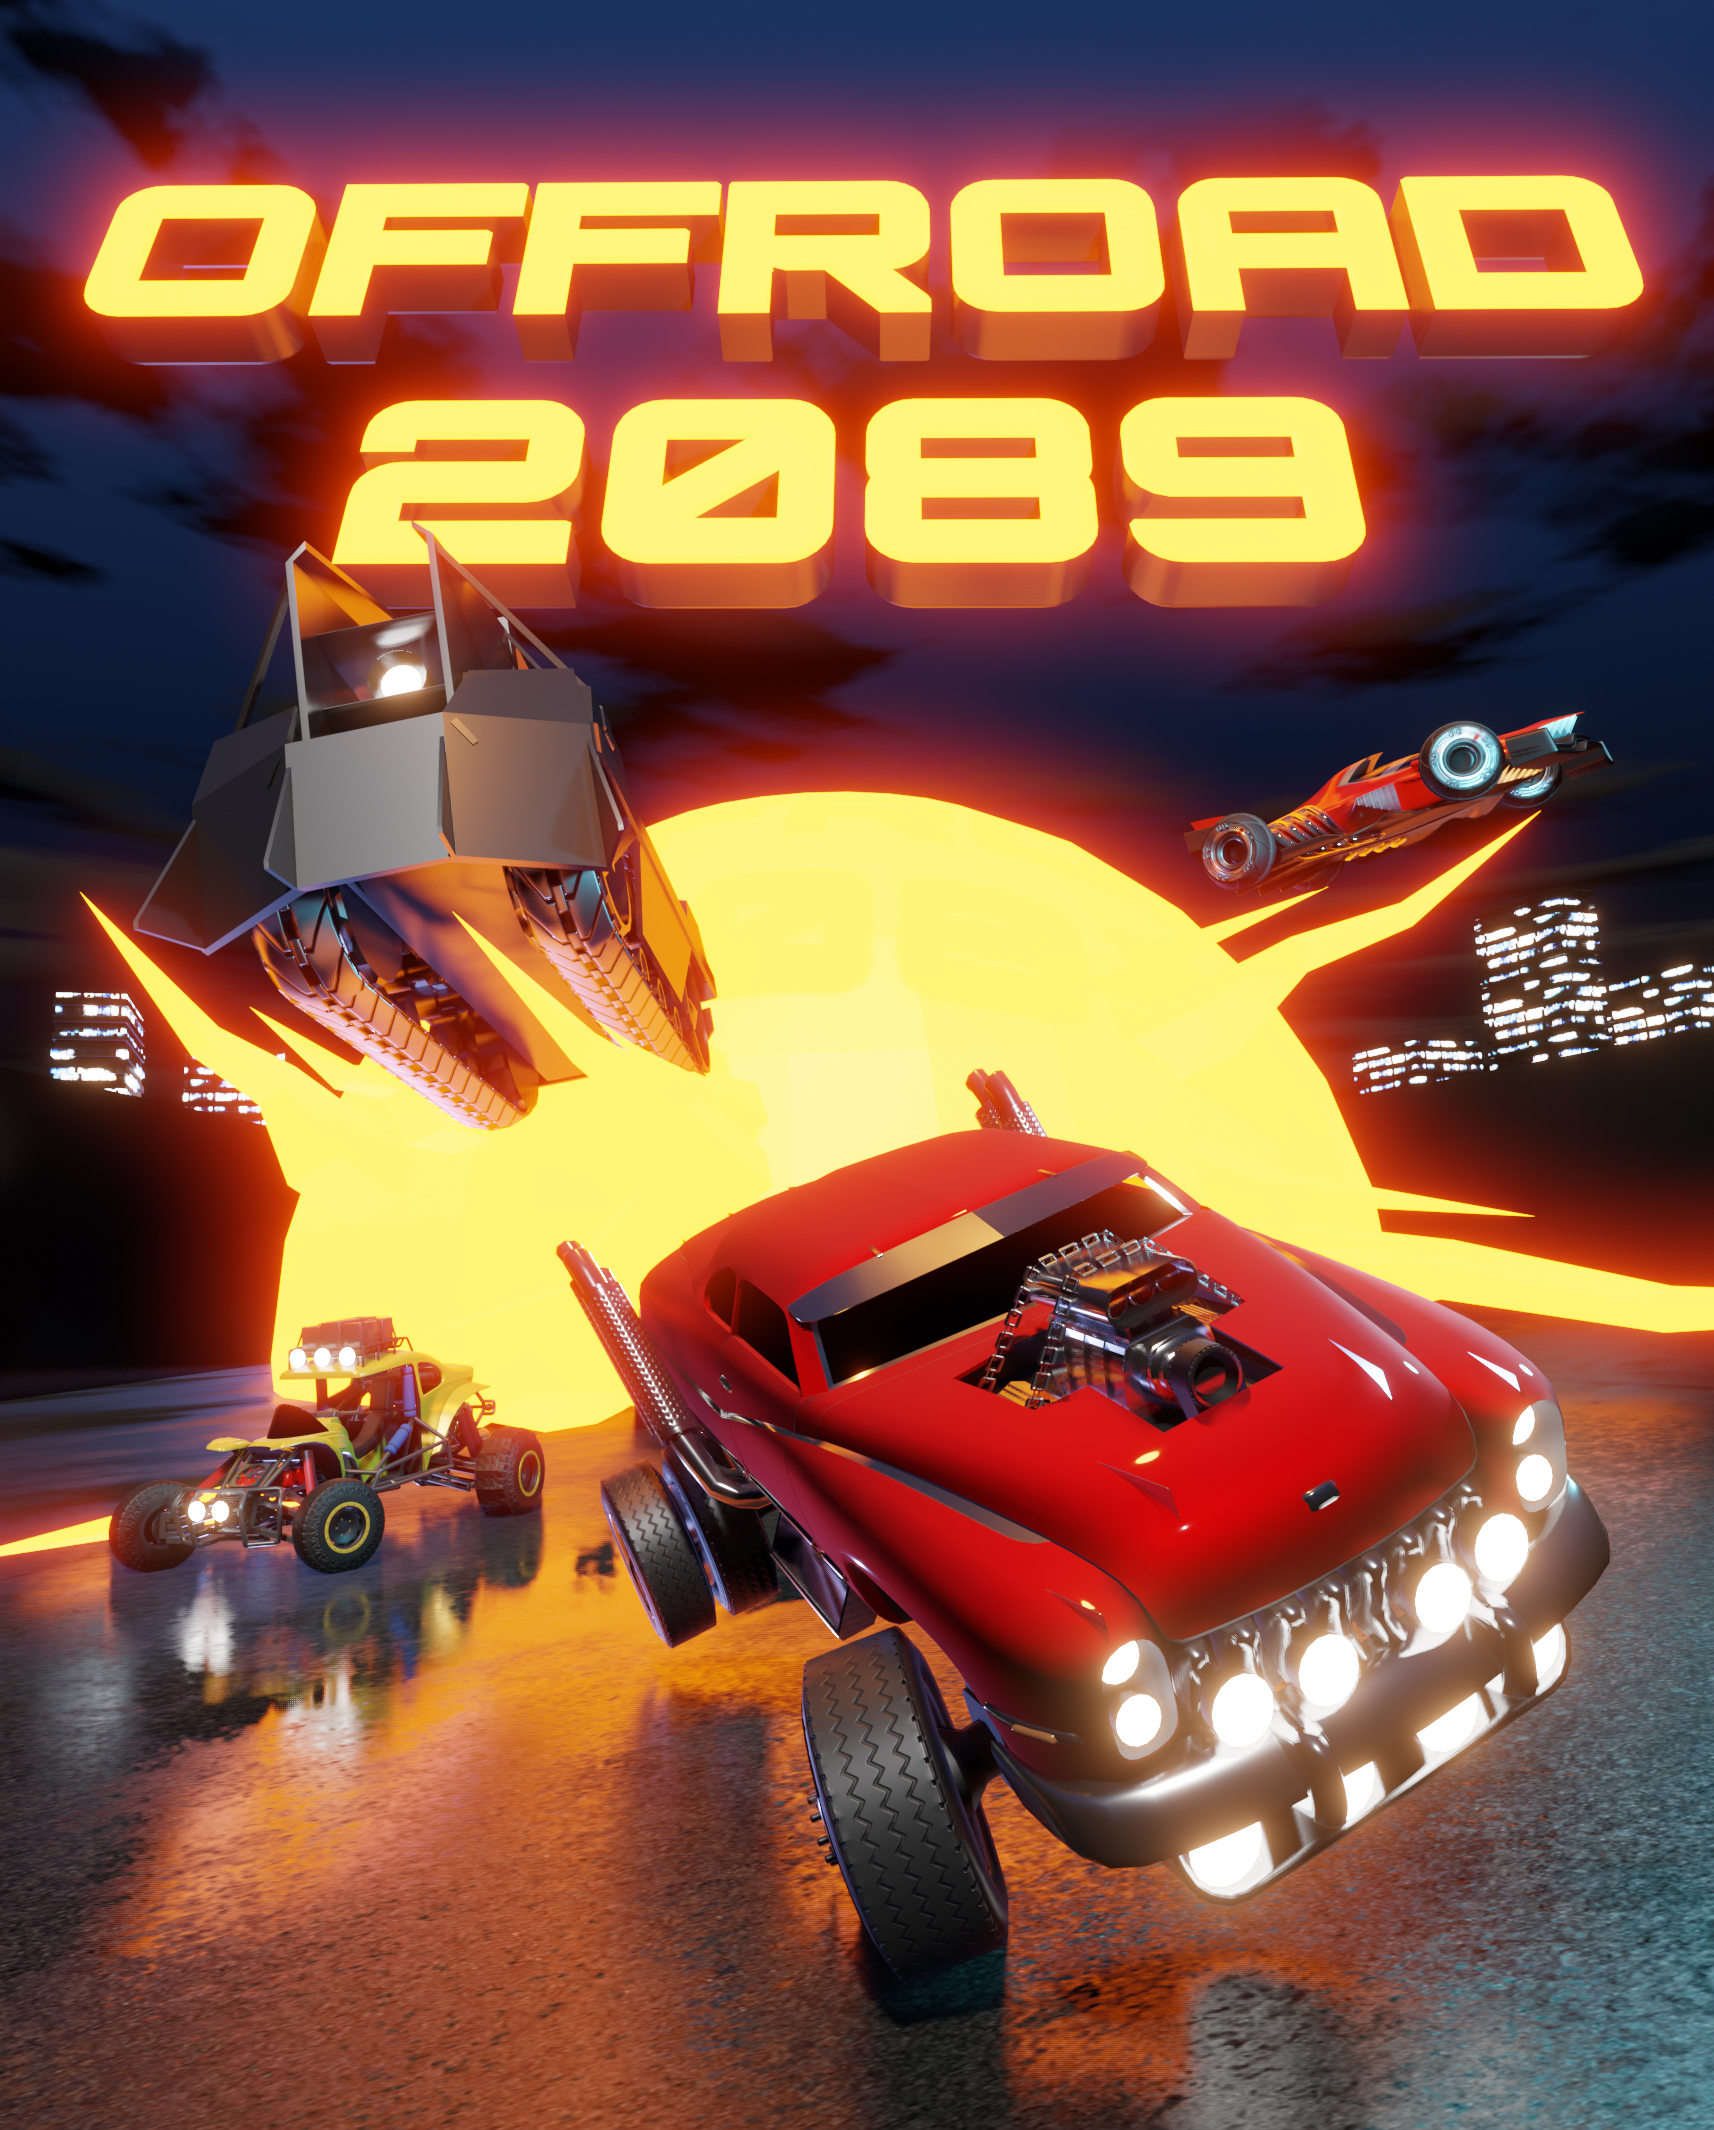 OFFROAD 2089